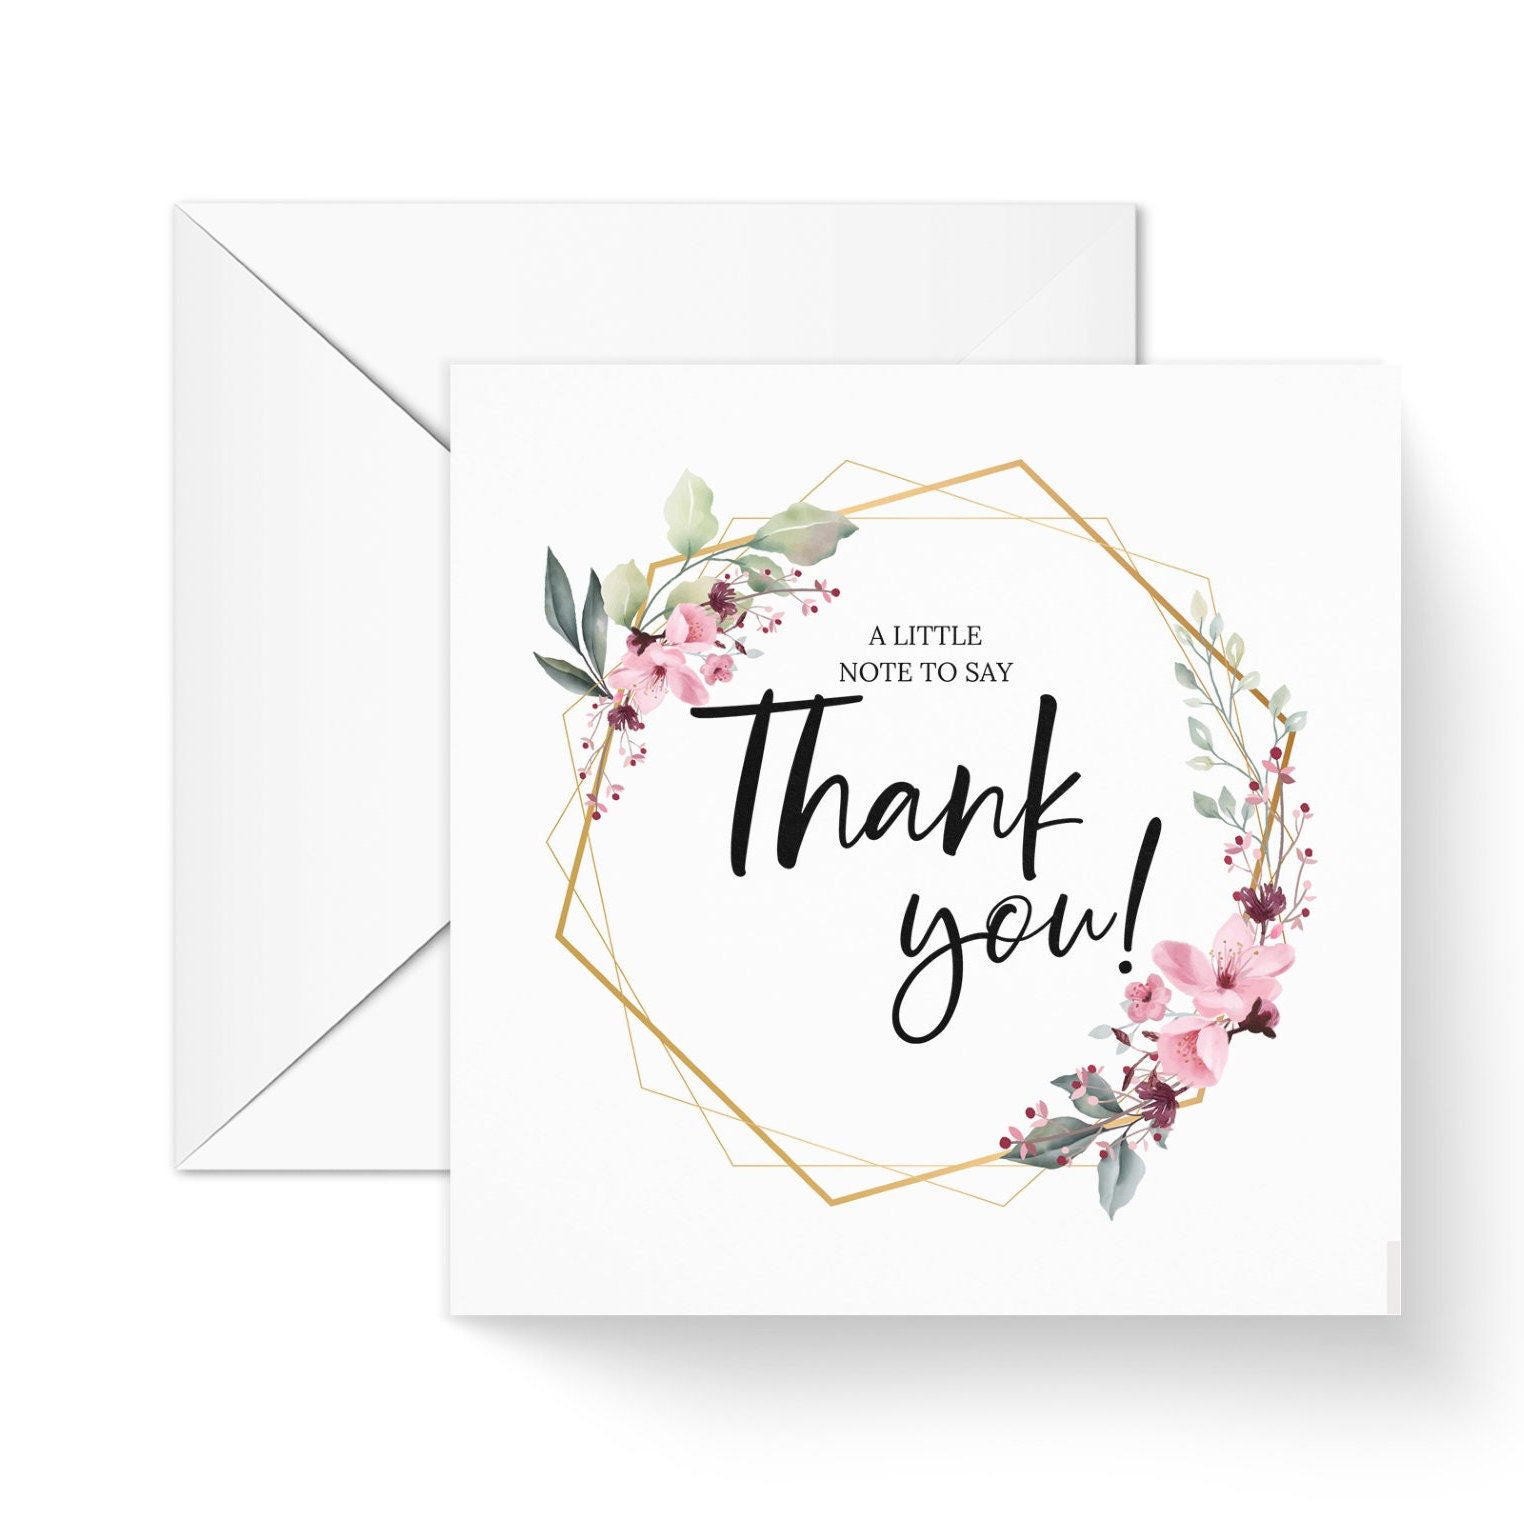 A little note to say thank you greeting card